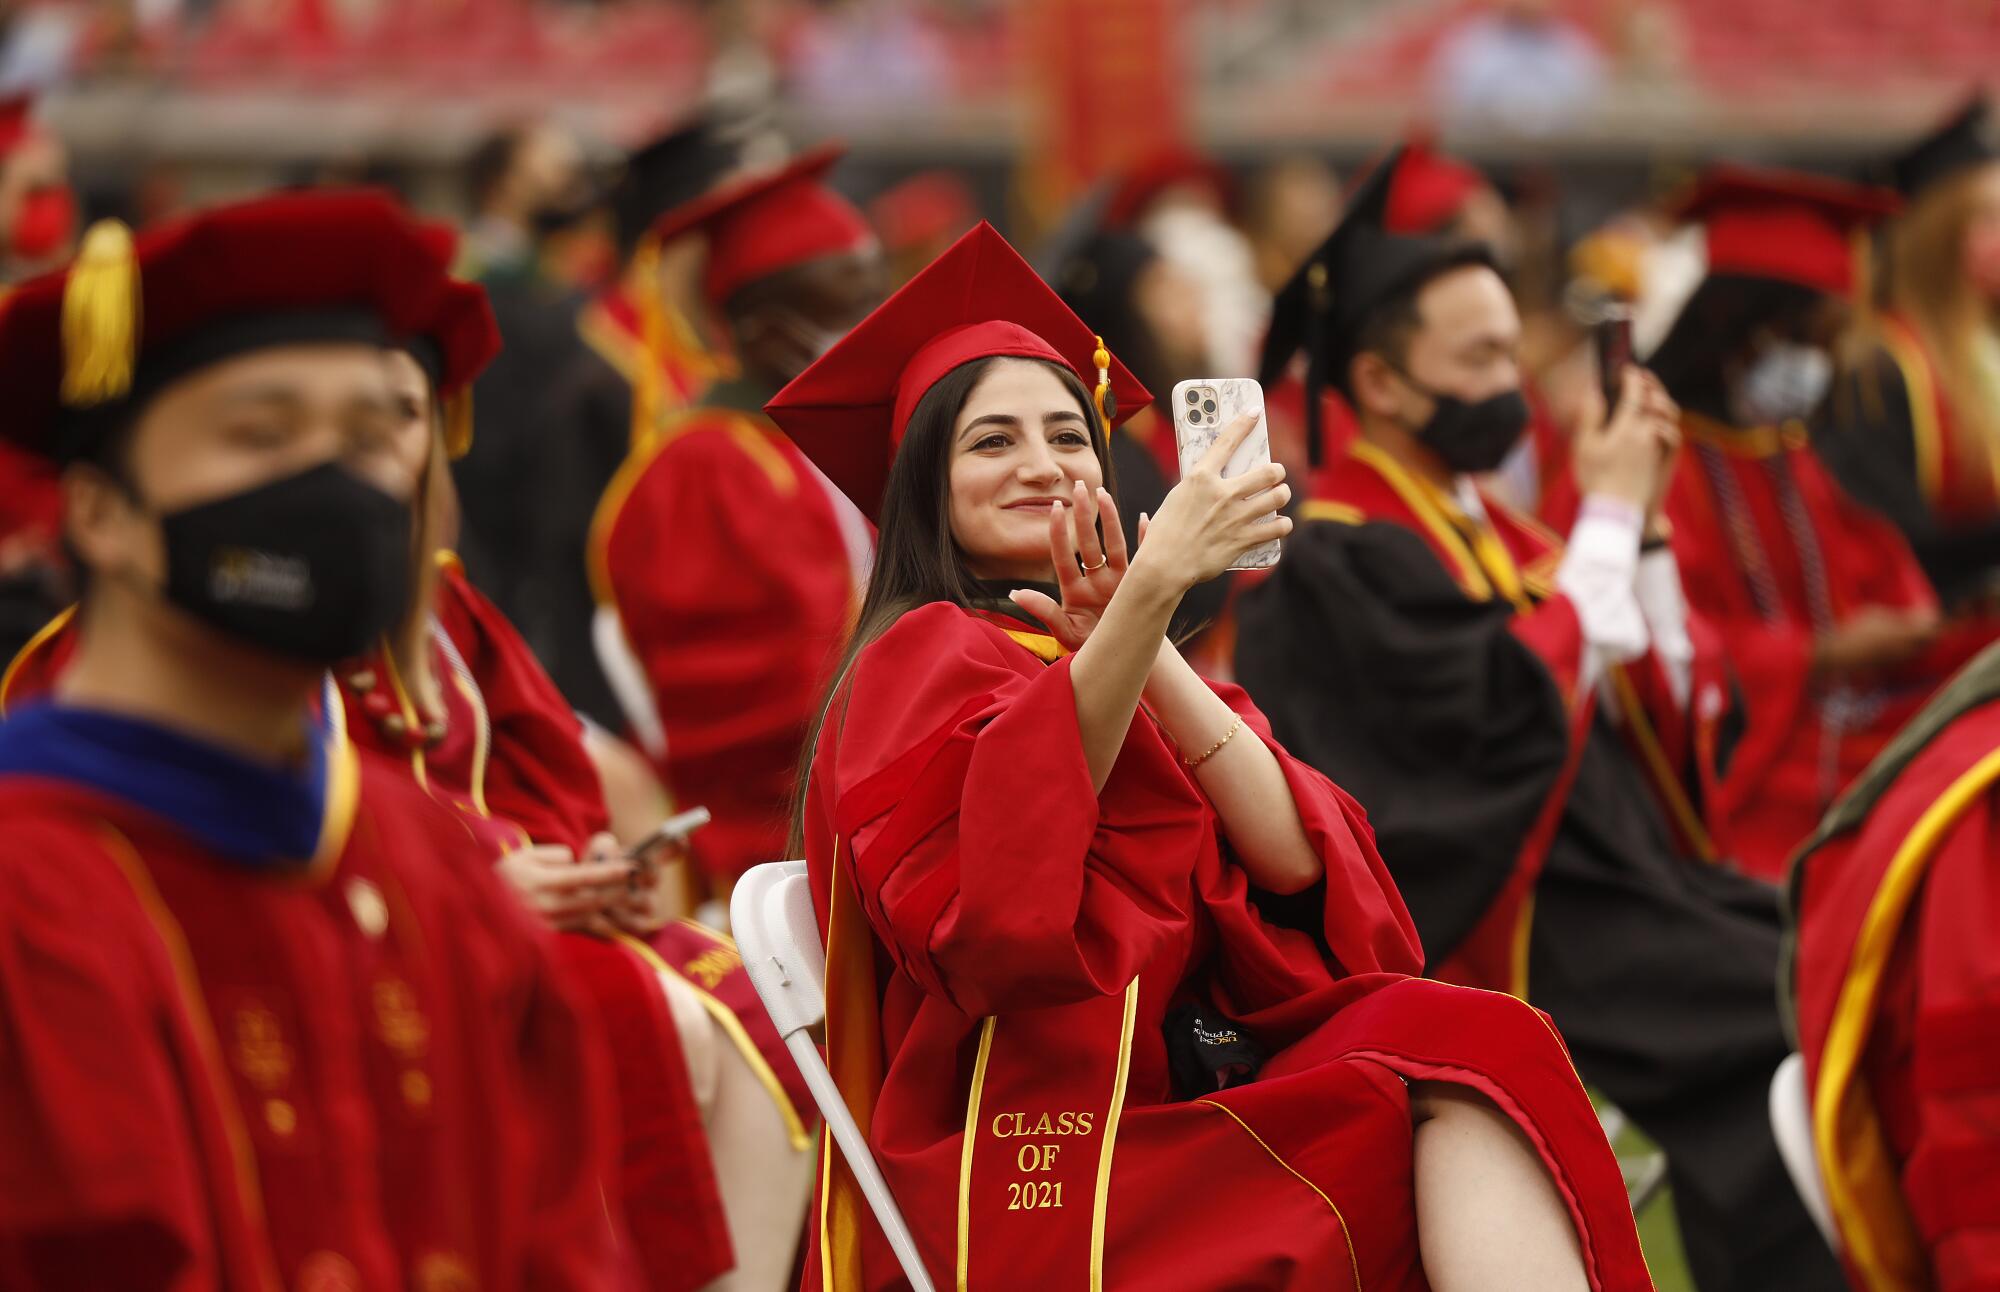 A woman in a red graduation gown smiles and waves at her phone while on a video call